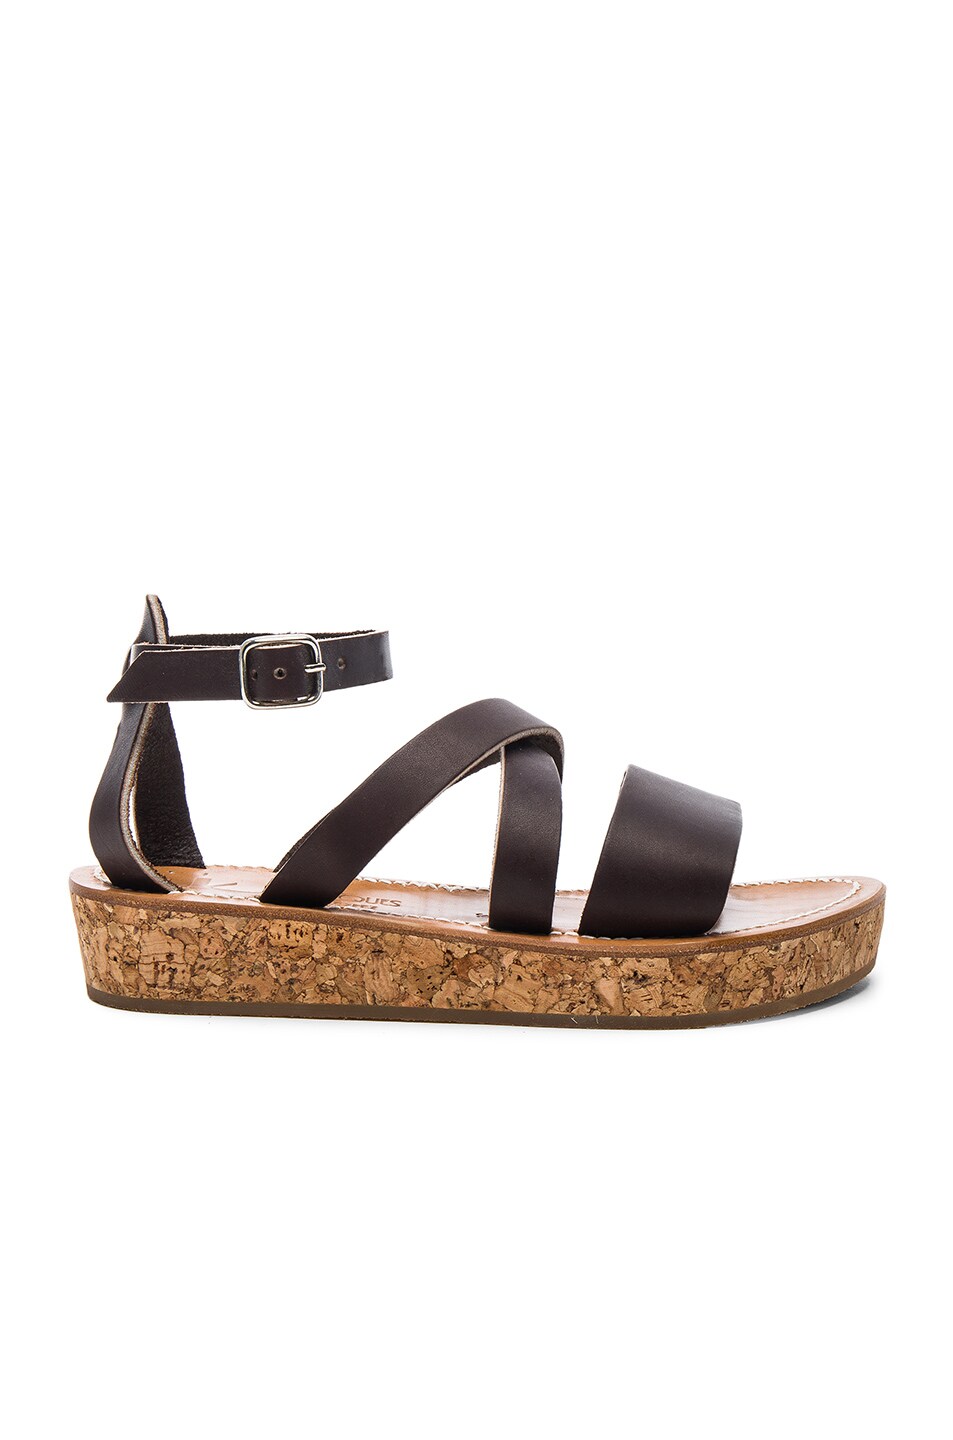 Image 1 of K Jacques Leather Thoronet Platform Sandals in Cafe